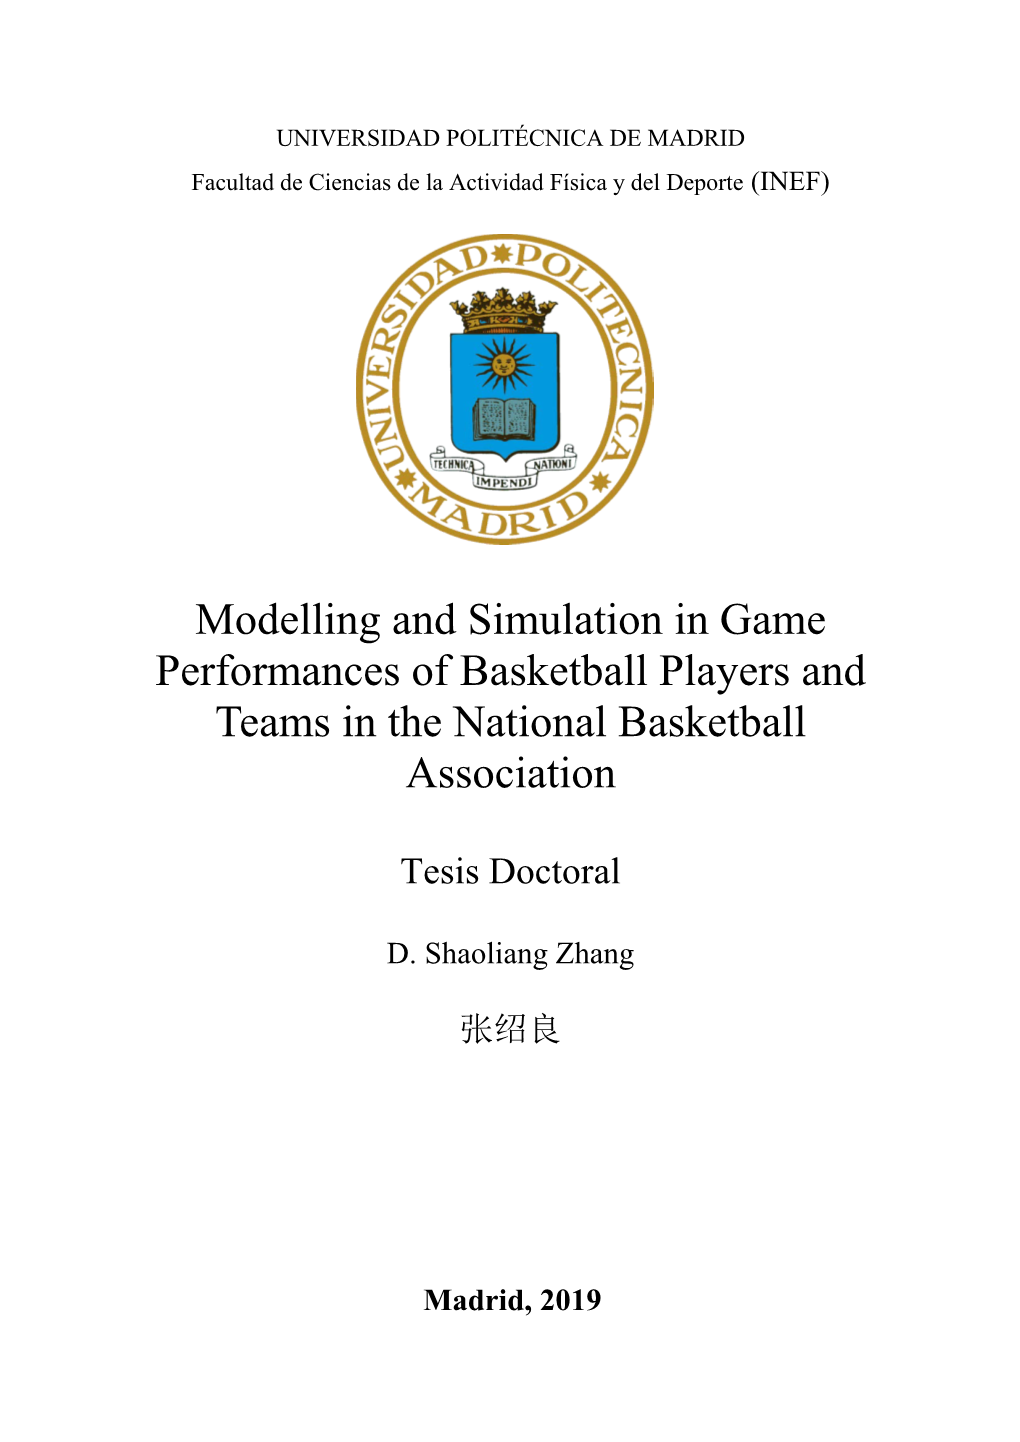 Modelling and Simulation in Game Performances of Basketball Players and Teams in the National Basketball Association